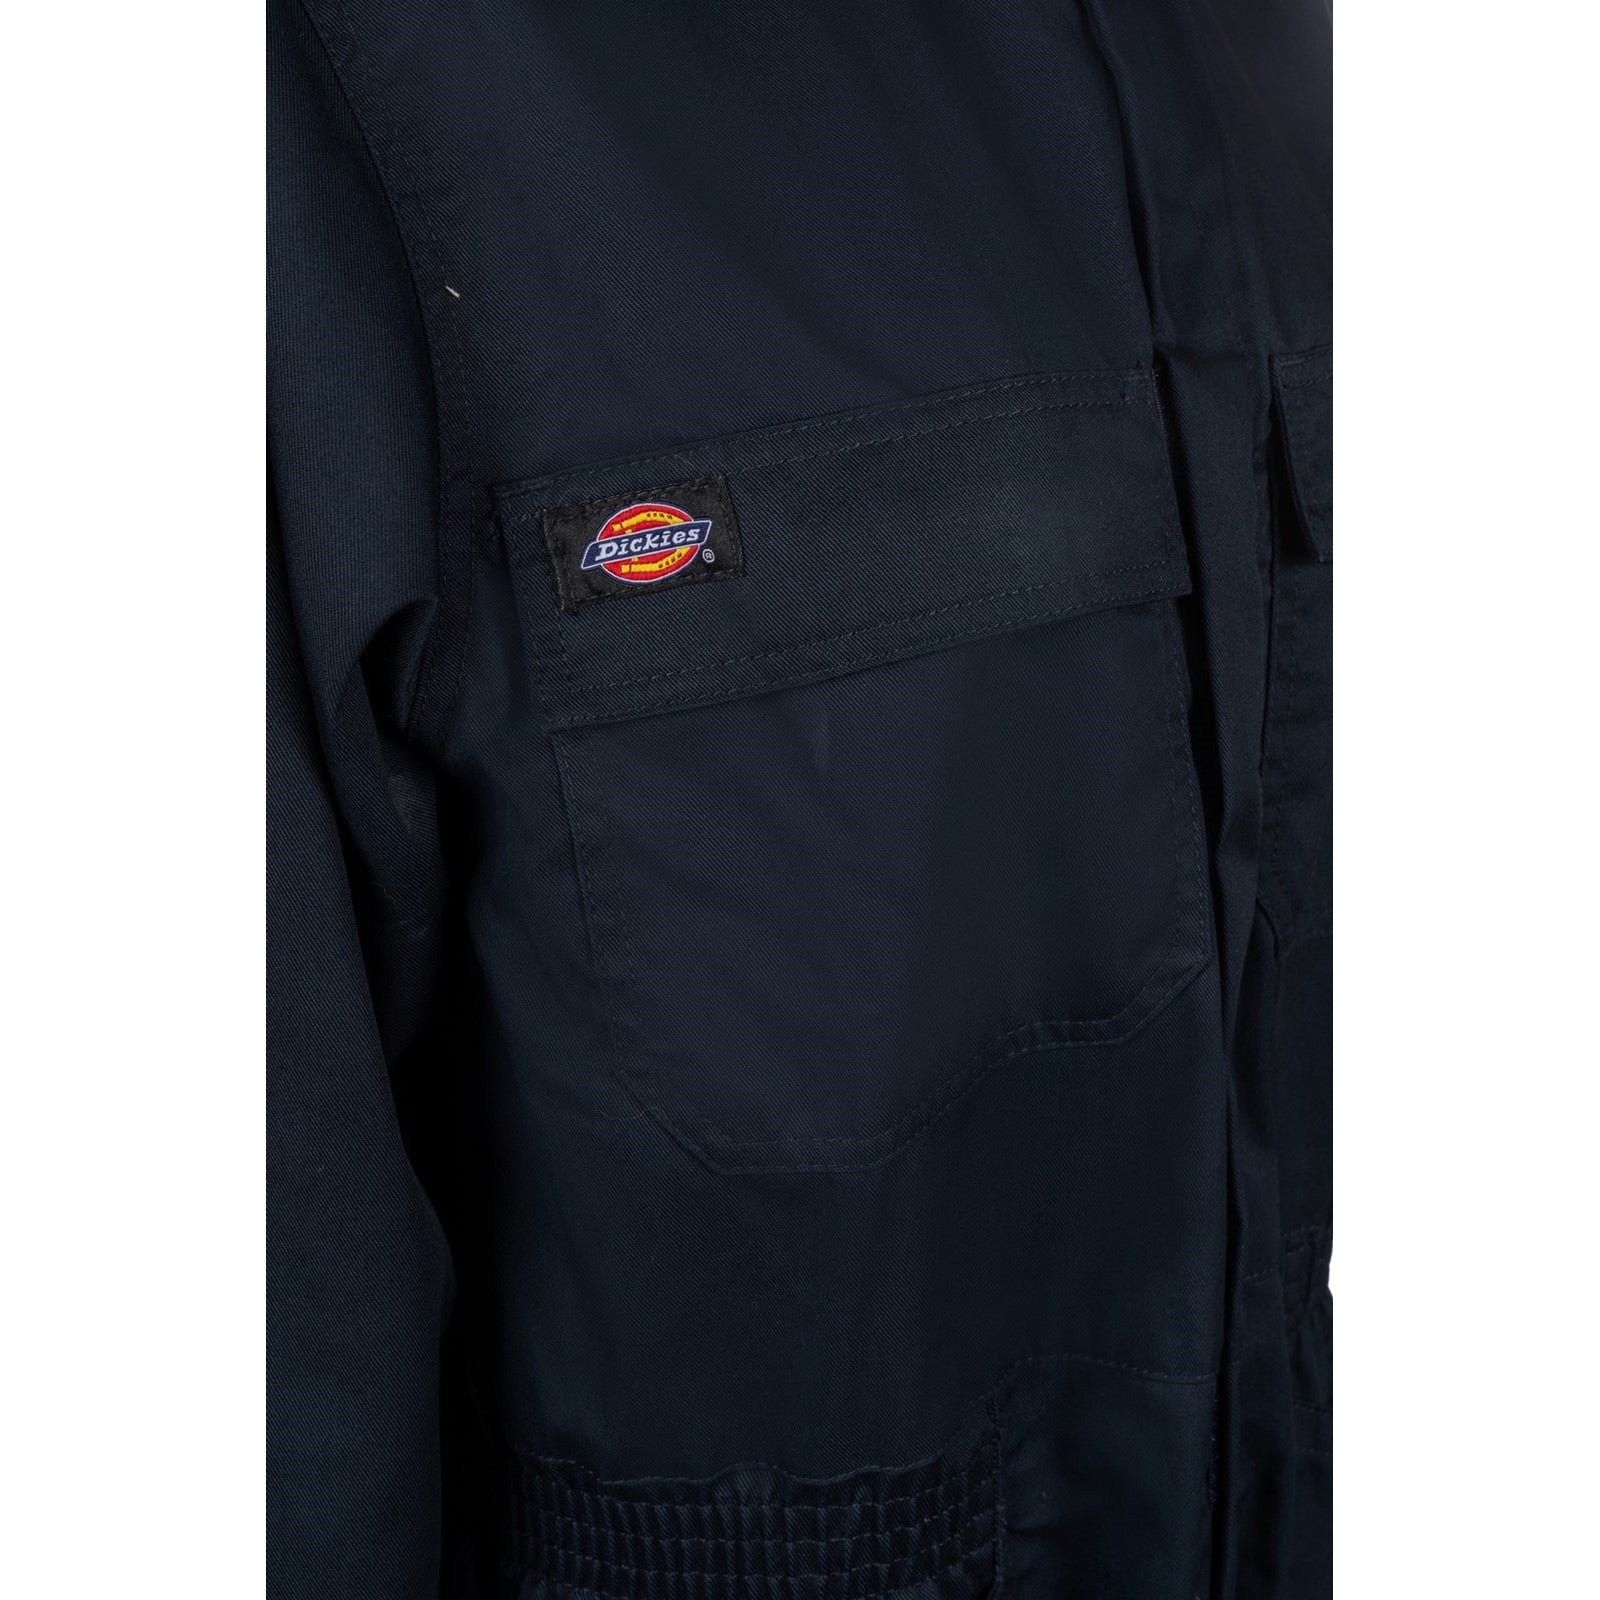 Dickies Everyday Coverall